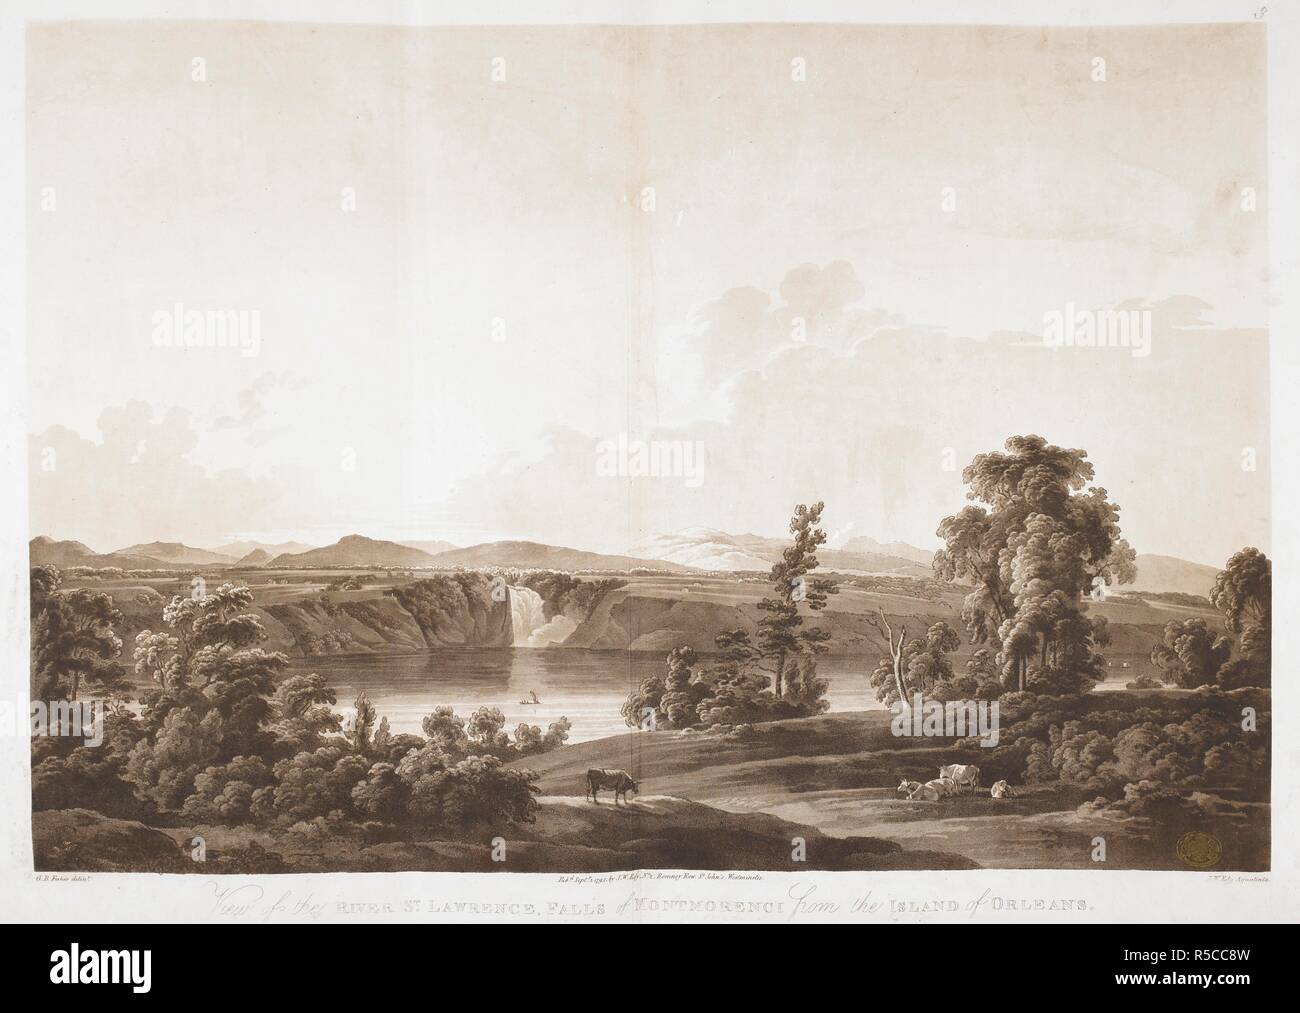 Landscape with cattle in foreground, river with a boat below and a waterfall behind, mountains on the horizon. View of the RIVER LAWRENCE, FALLS of MONTMORENCI from the ISLAND of ORLEANS. [London] : Pubd Septr 1 1795 by J.W. Edy, No 2, Romney Row, St John's, Westminster., [September 1 1795]. Aquatint and etching. Source: Maps K.Top.119.30.c. Language: English. Author: Edy, John William. Stock Photo